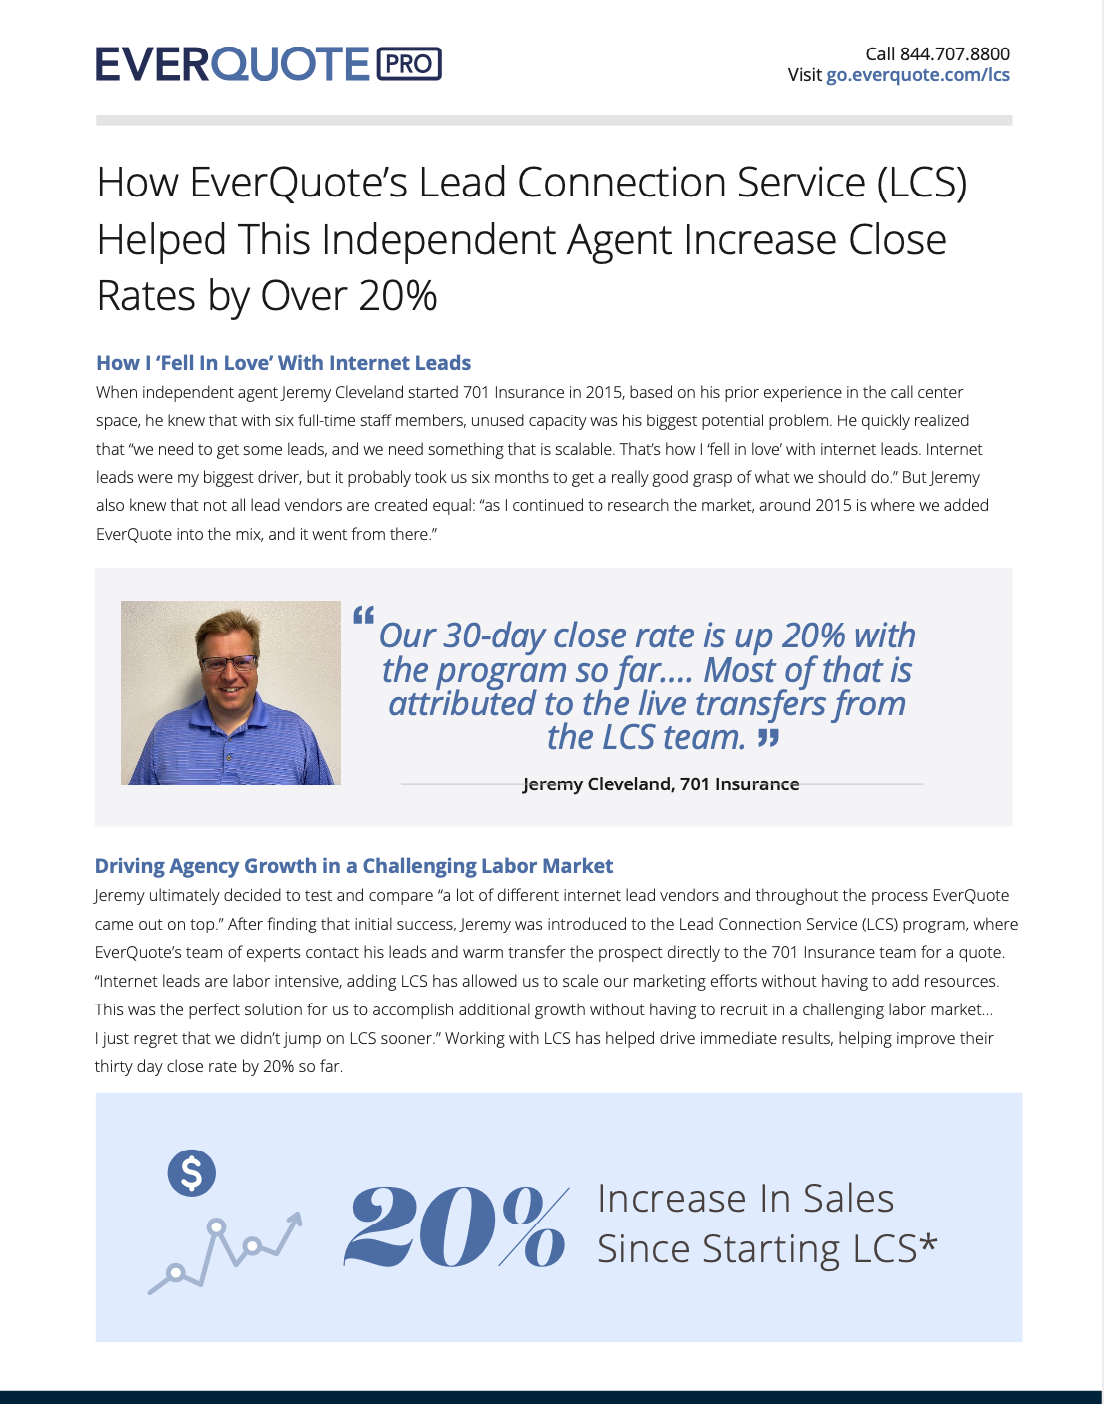 EverQuote Lead Connection Service (LCS) Case Study – 701 Insurance